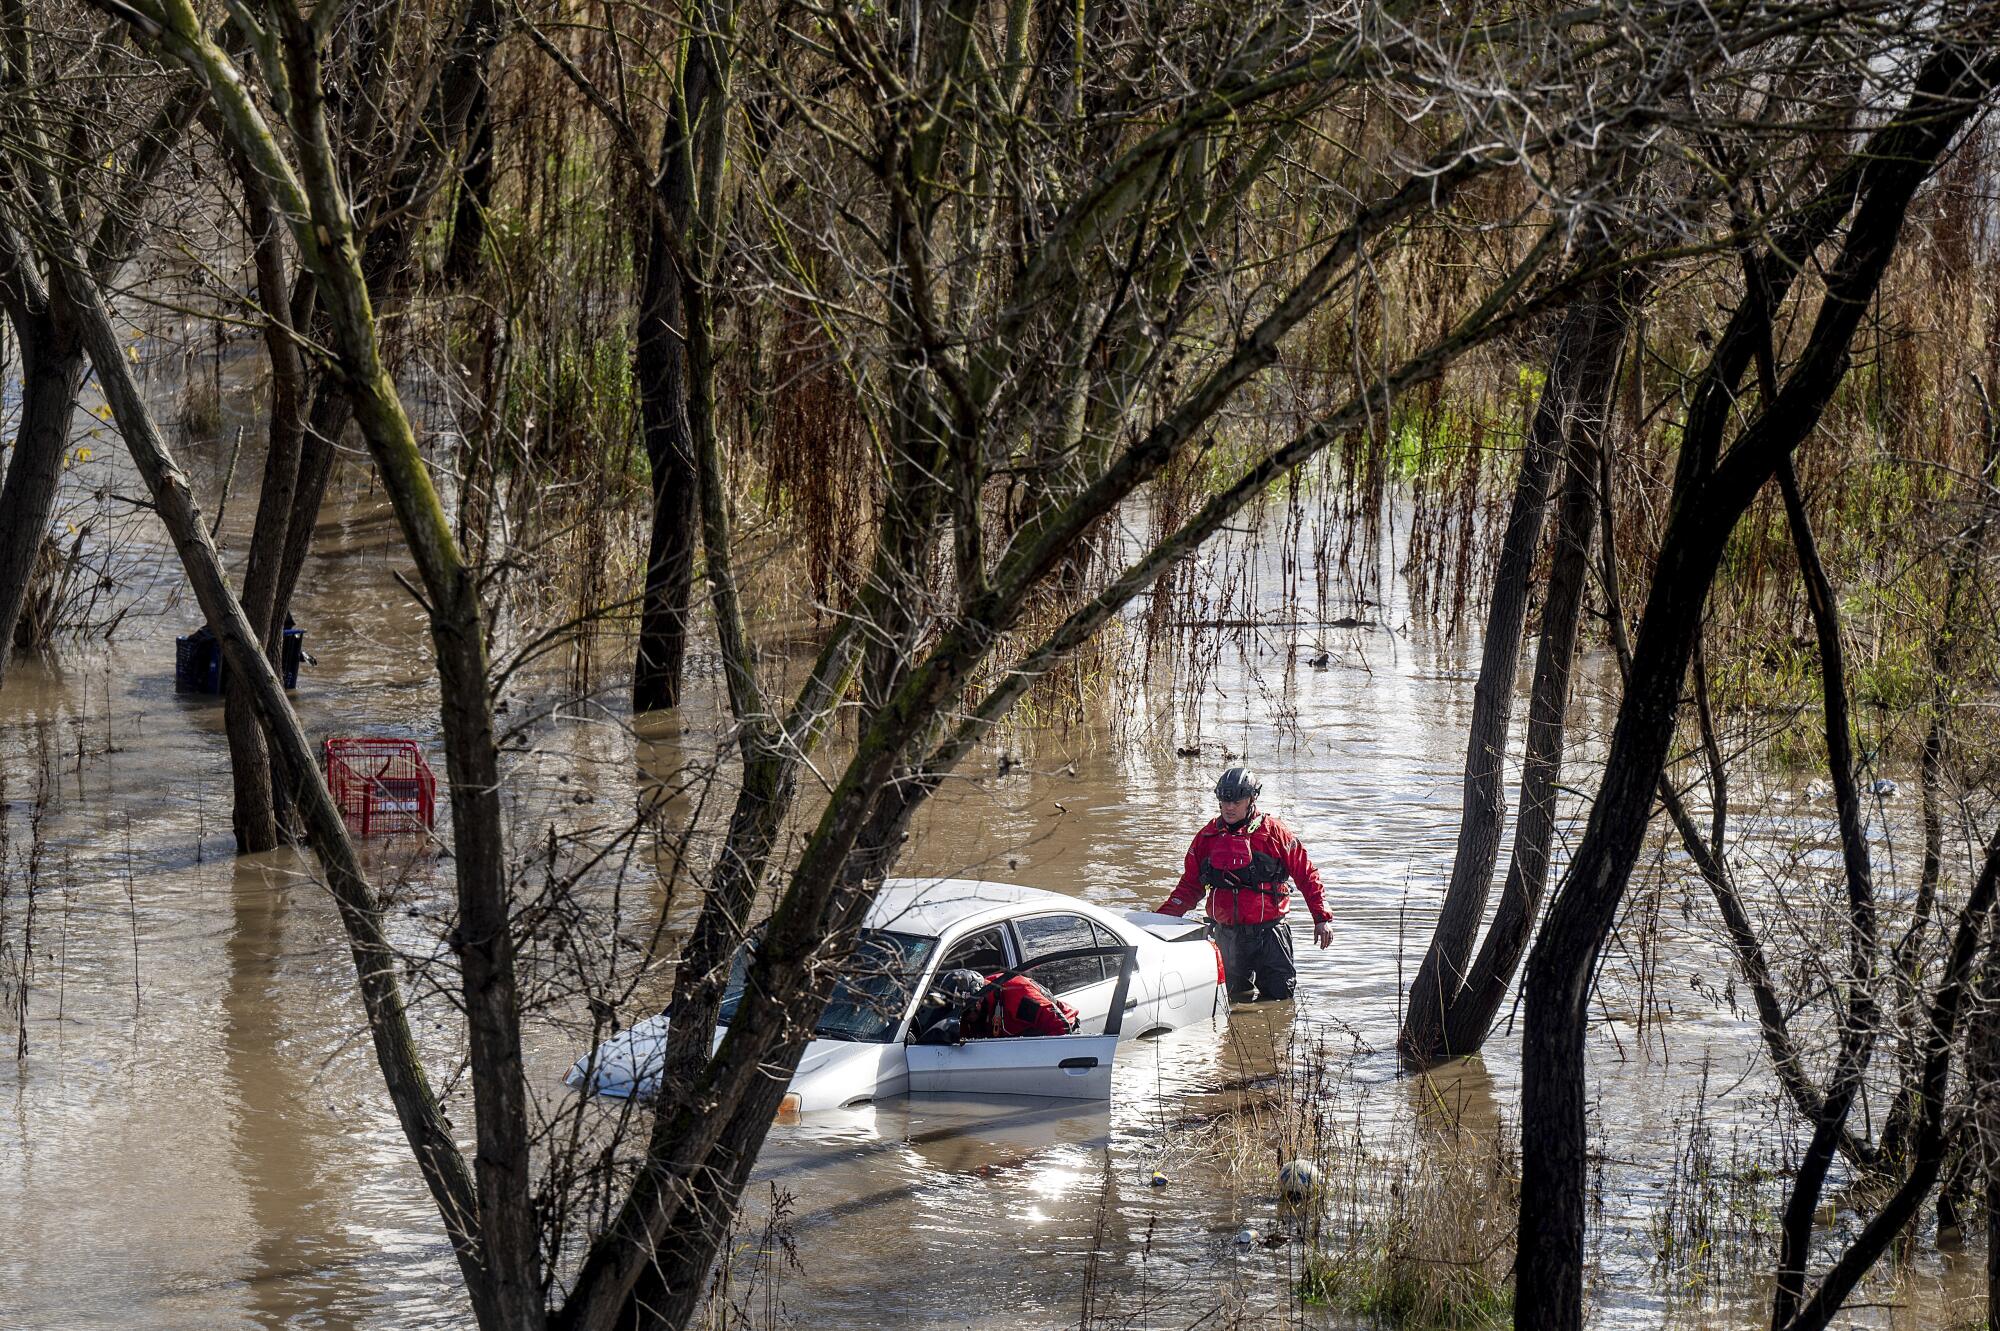 Search and rescue workers investigate a car surrounded by floodwater as heavy rains caused the Guadalupe River to swell.